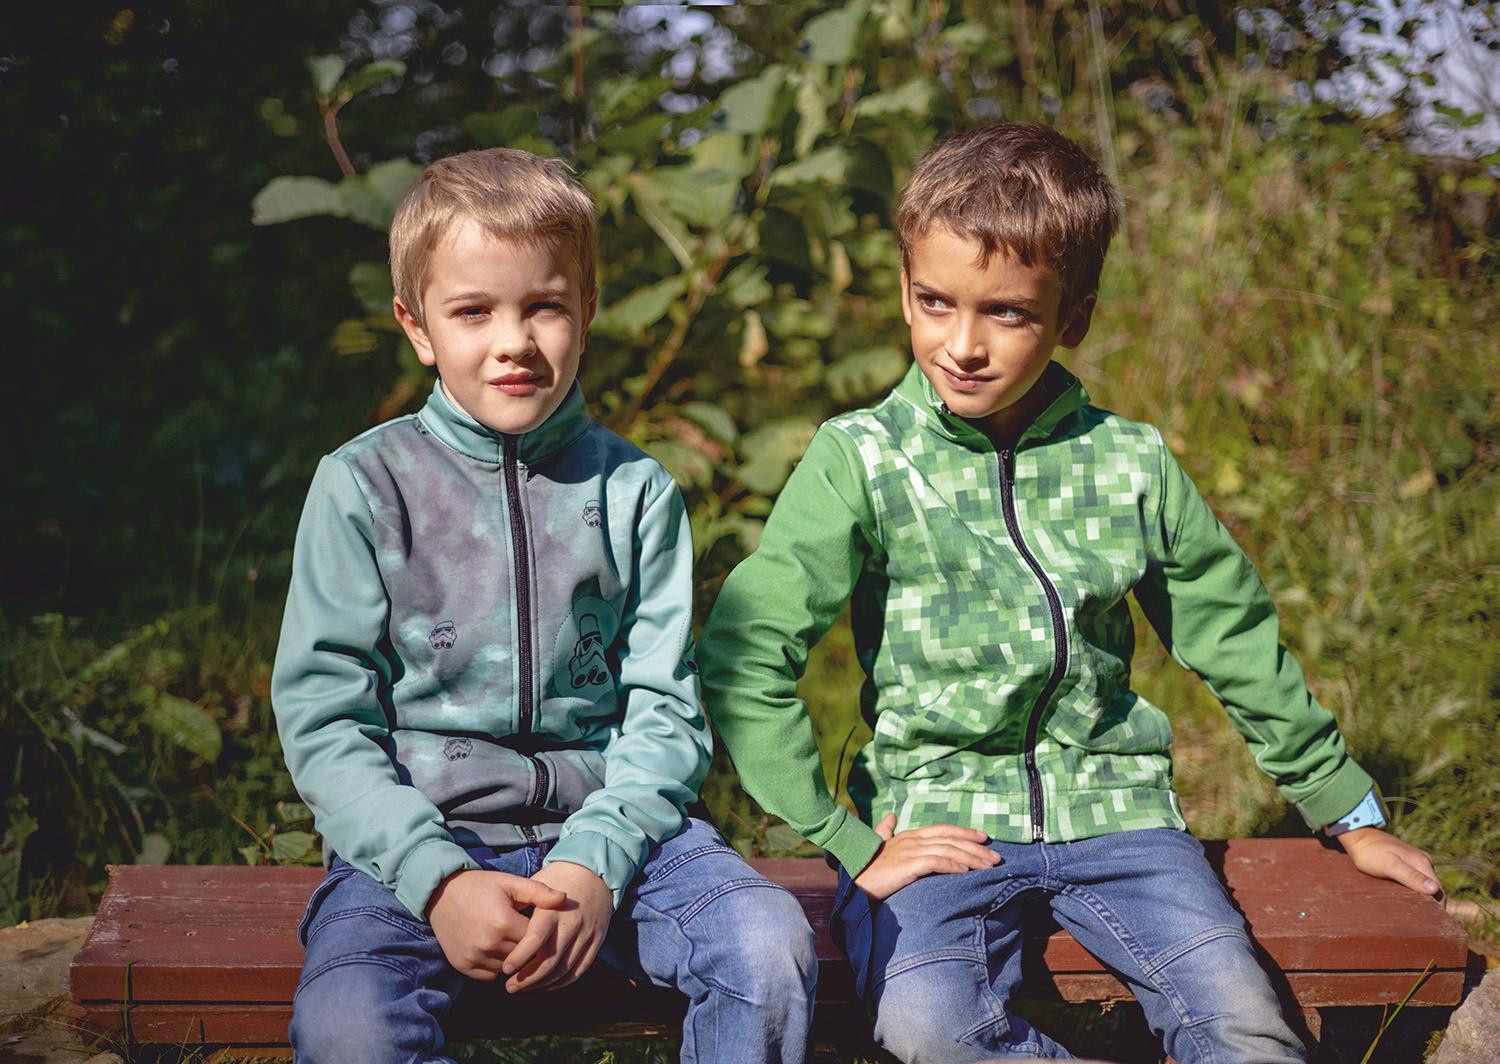 "MAX" CHILDREN'S TRAINING JACKET - FROST PAT. 3 - knit with short nap